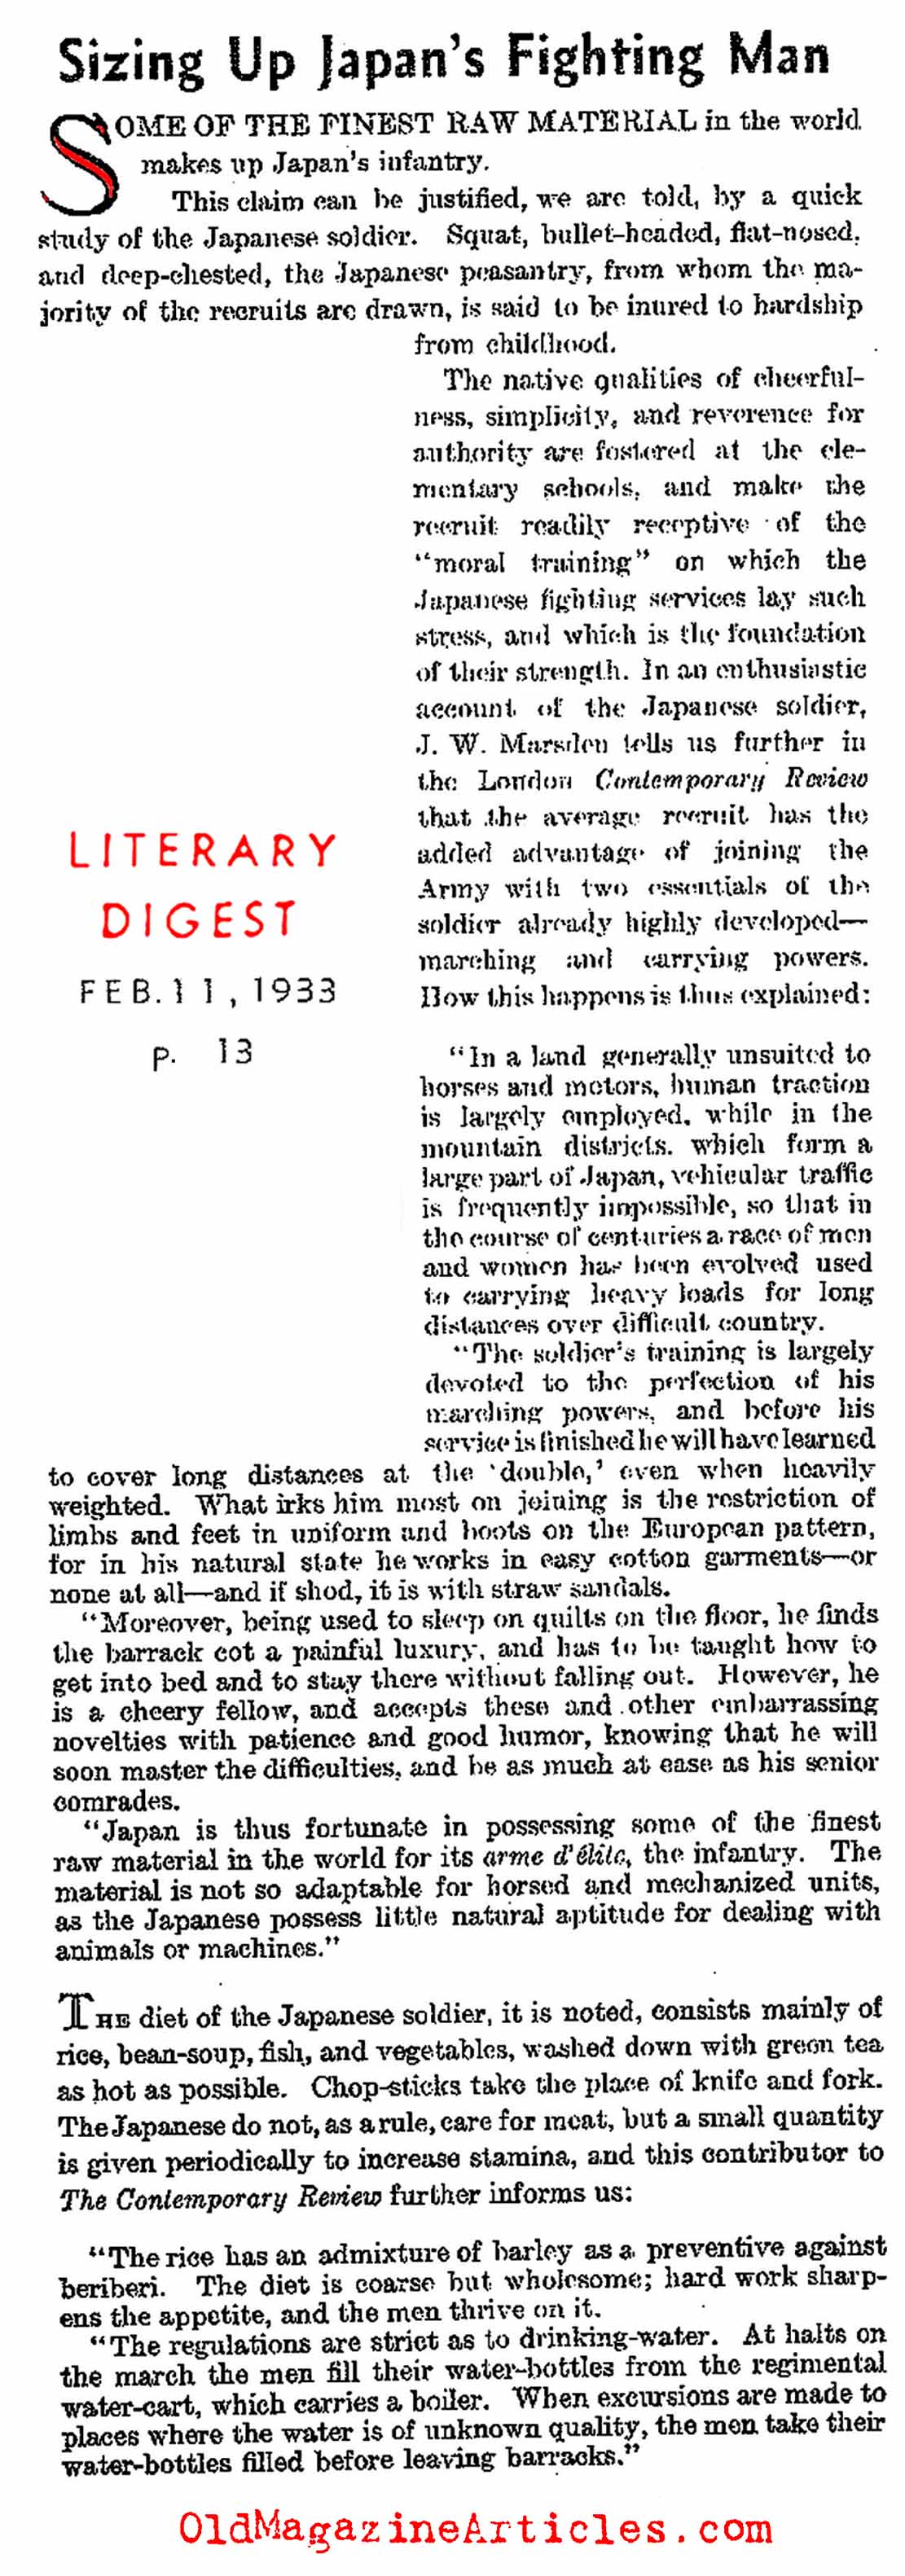 The Japanese Soldier In China (Literary Digest, 1933)